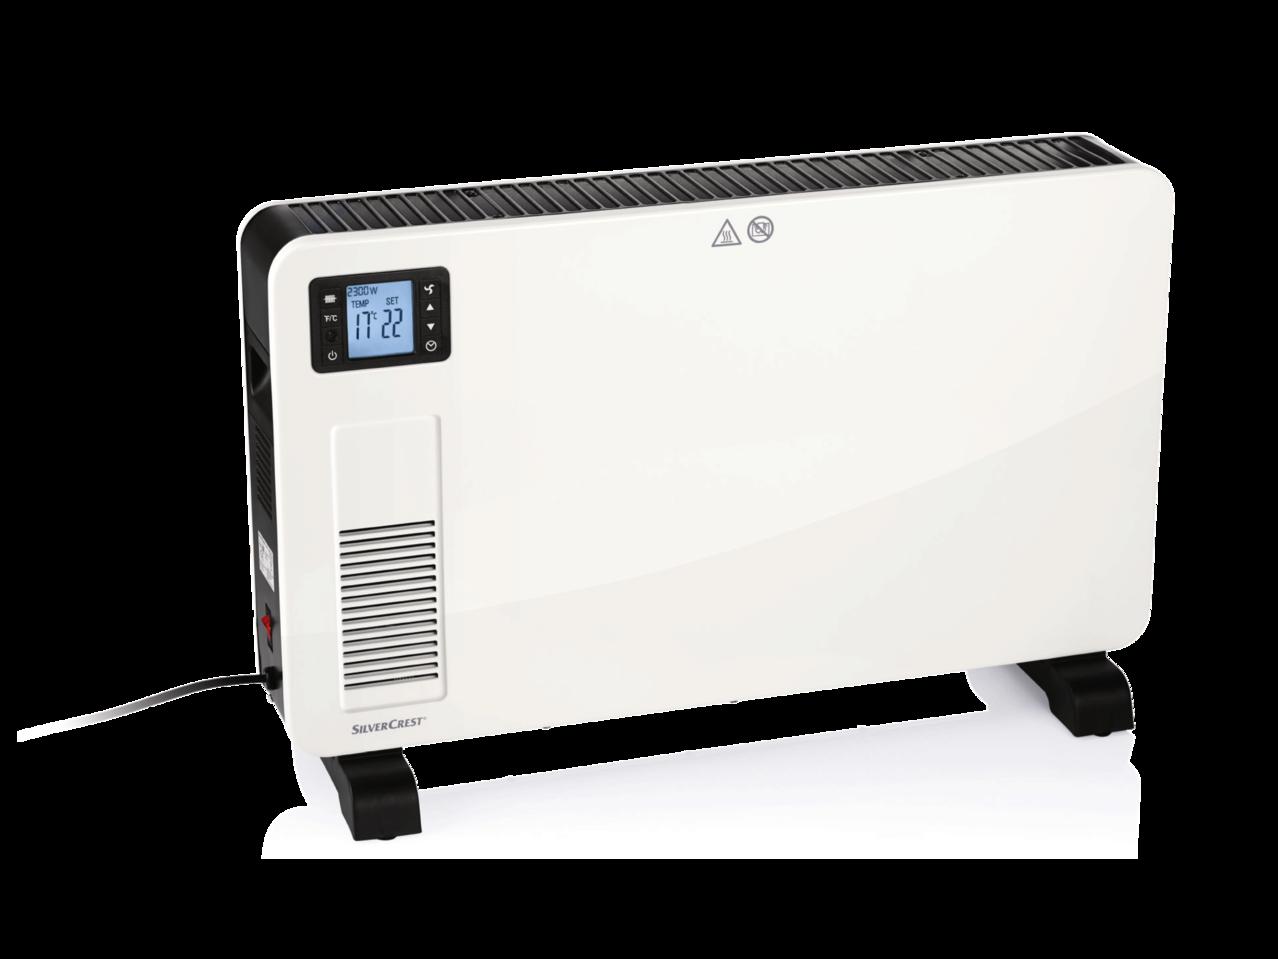 SILVERCREST 2,300W Convector Heater with LCD Display